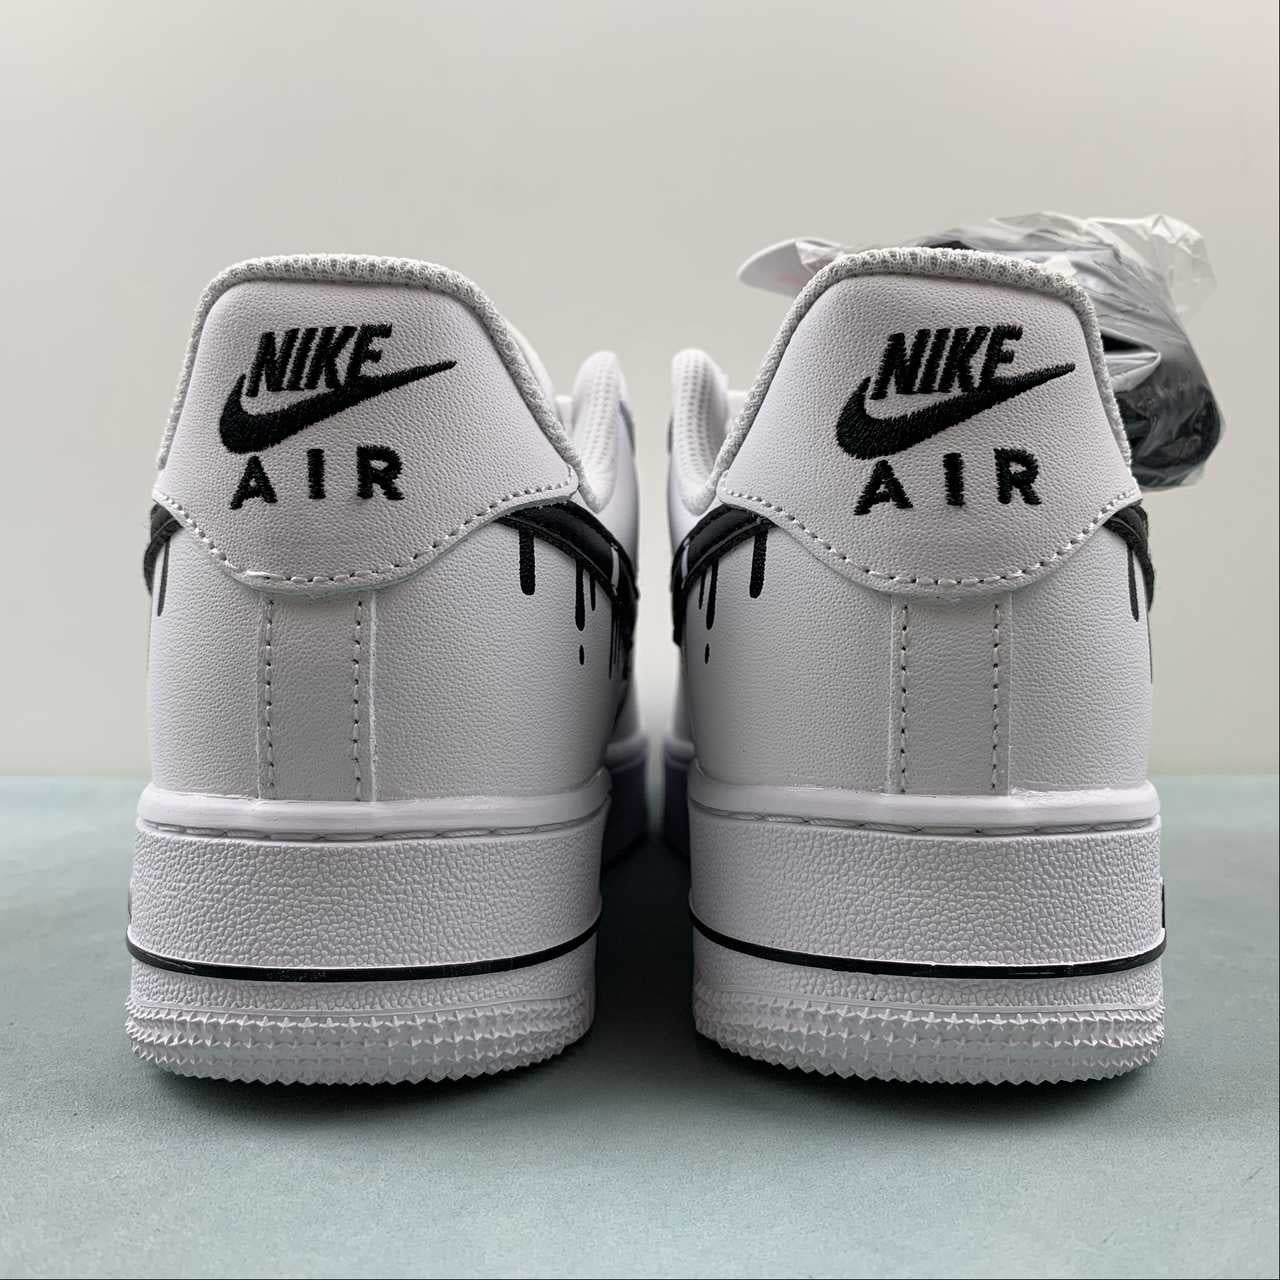 Nike airforce A1 the drip shoes